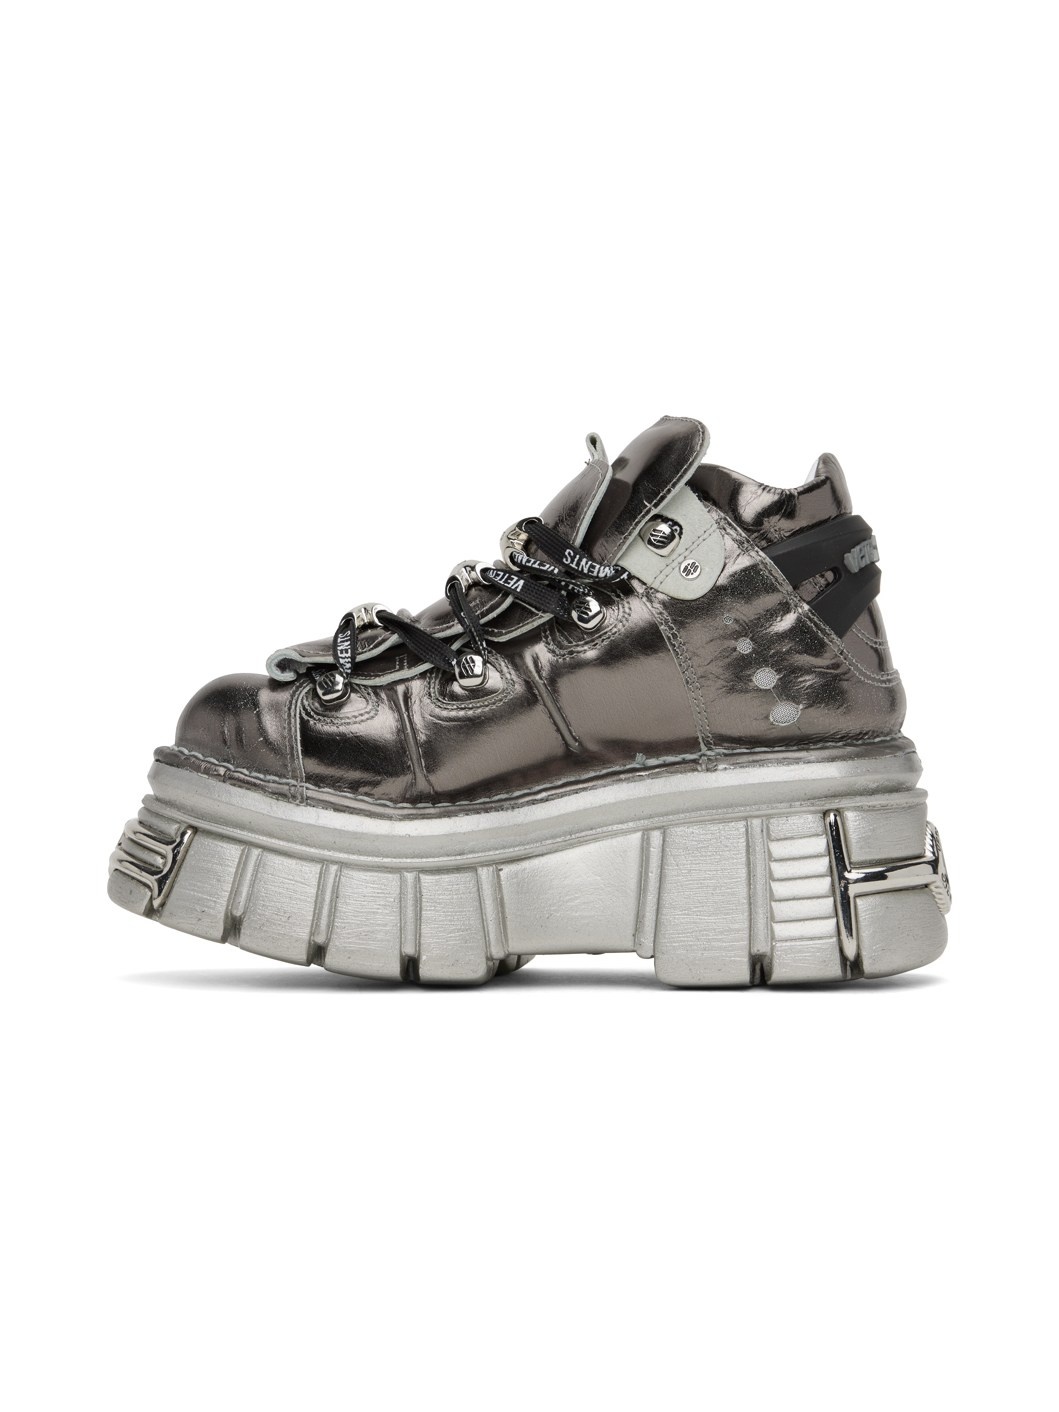 Silver New Rock Edition Platform Sneakers - 3